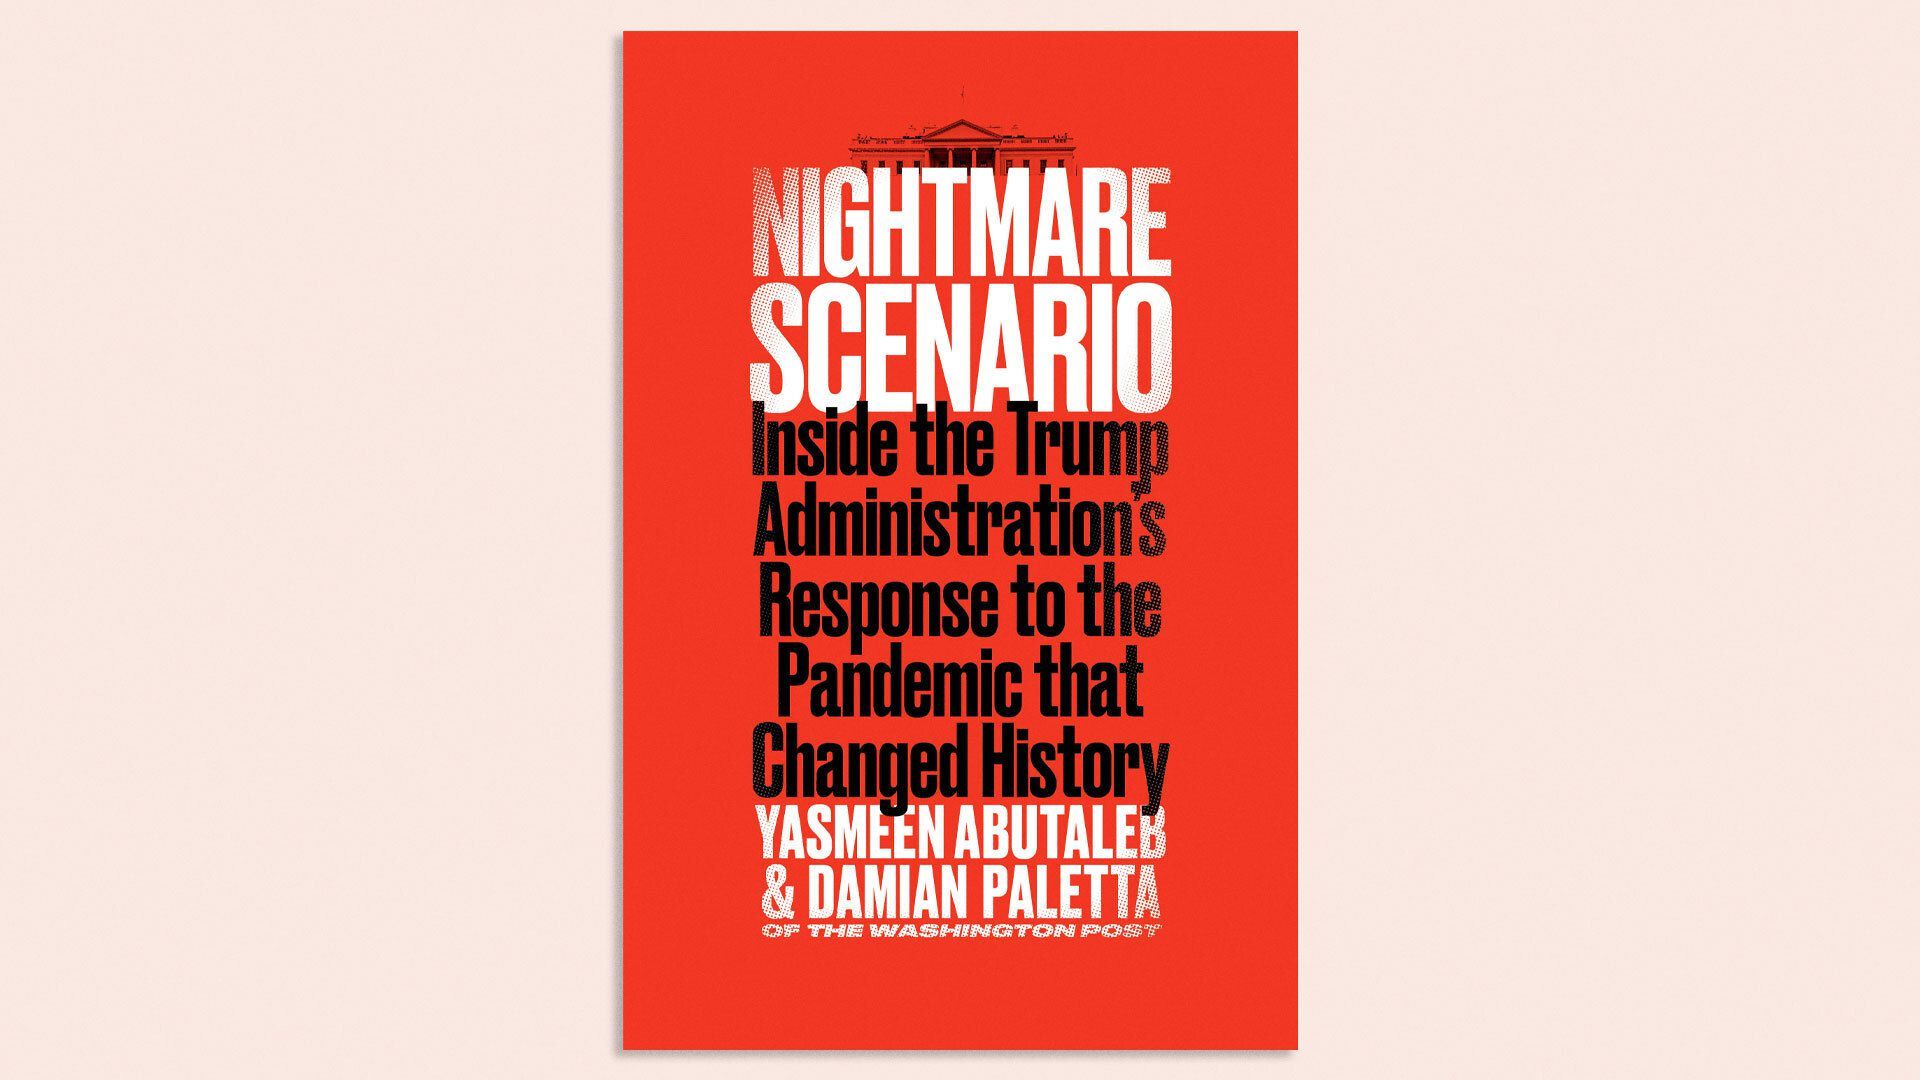 Picture of the cover of a book called "Nightmare Scenario: Inside the Trump Administration's Response to the Pandemic that Changed History"